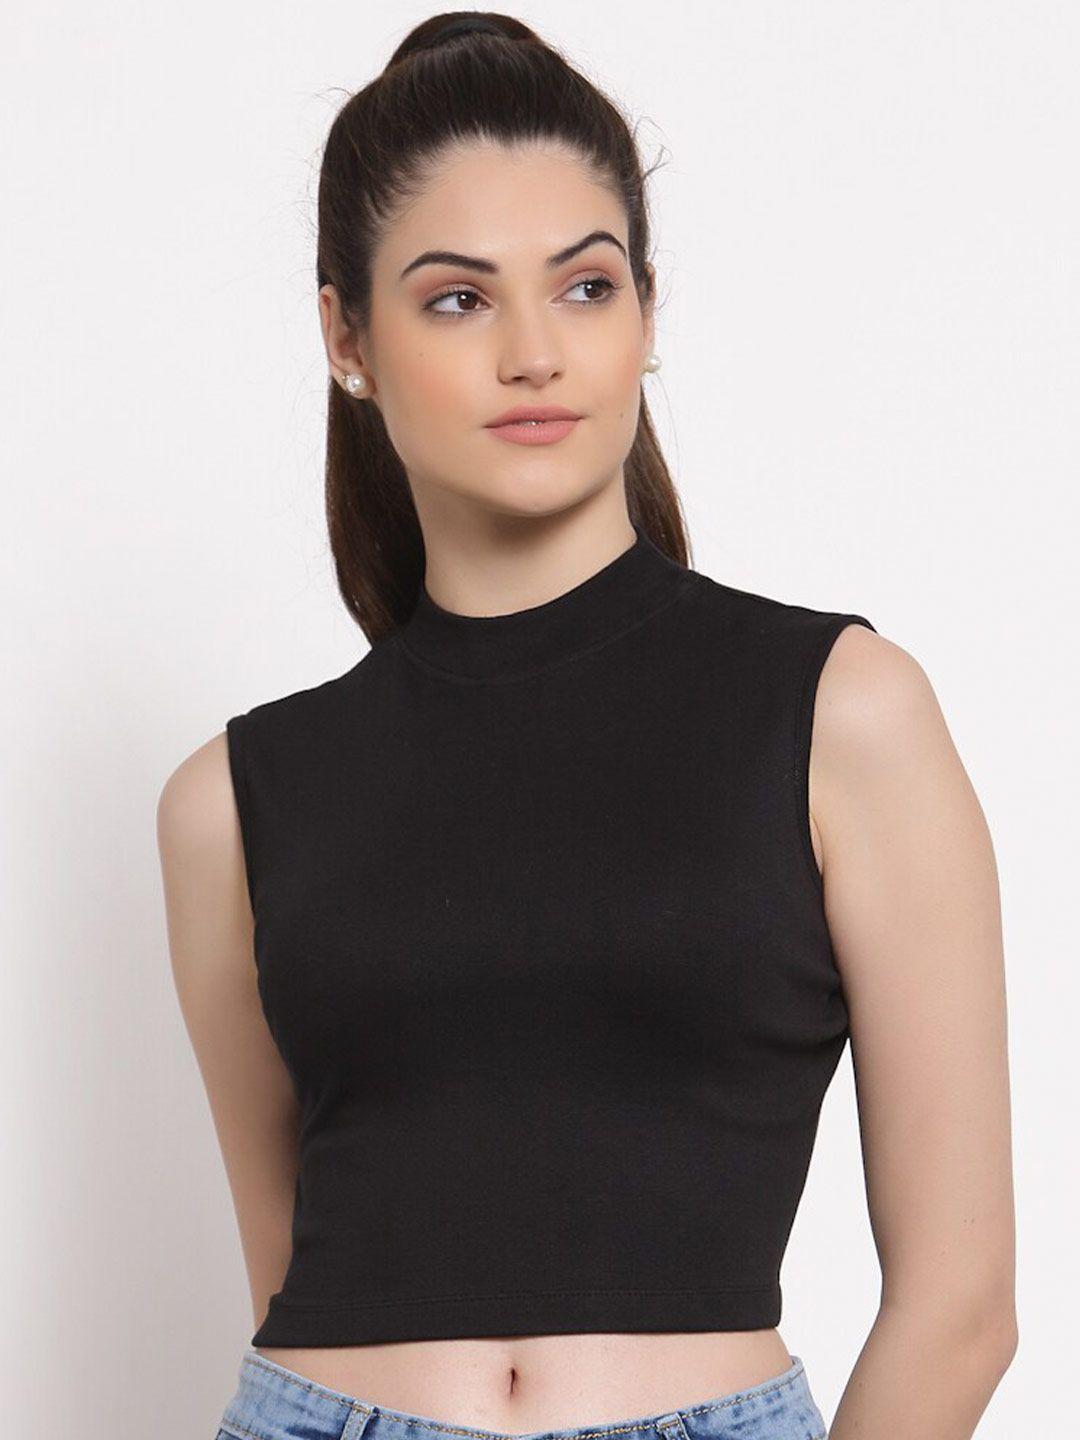 style-quotient-black-fitted-crop-top